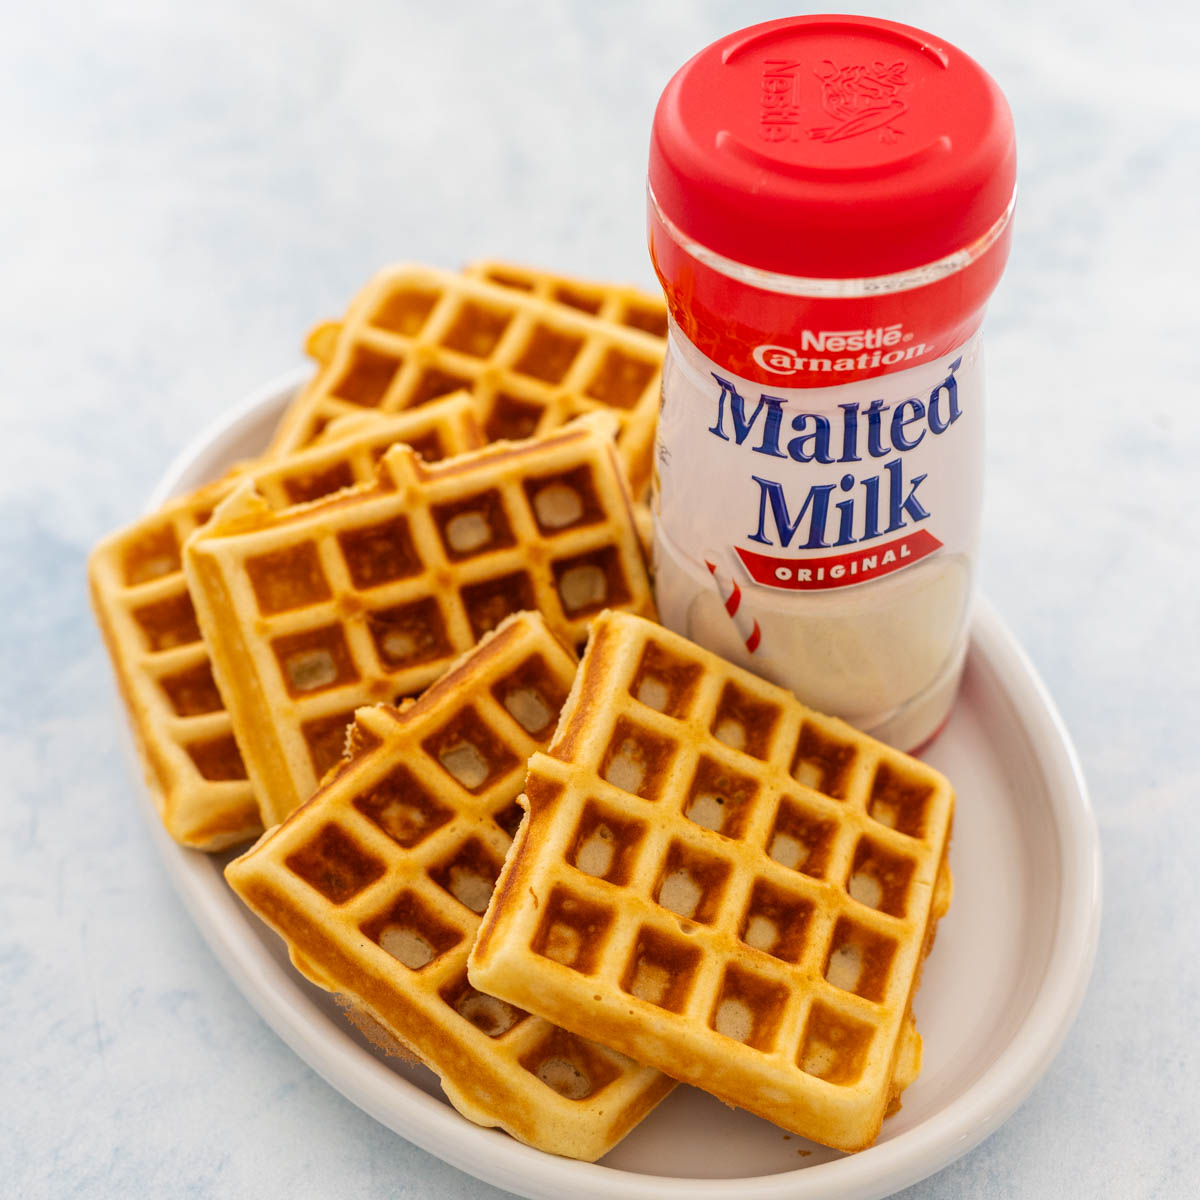 A platter of malted waffles has a bottle of Carnation Malted Milk on the side.